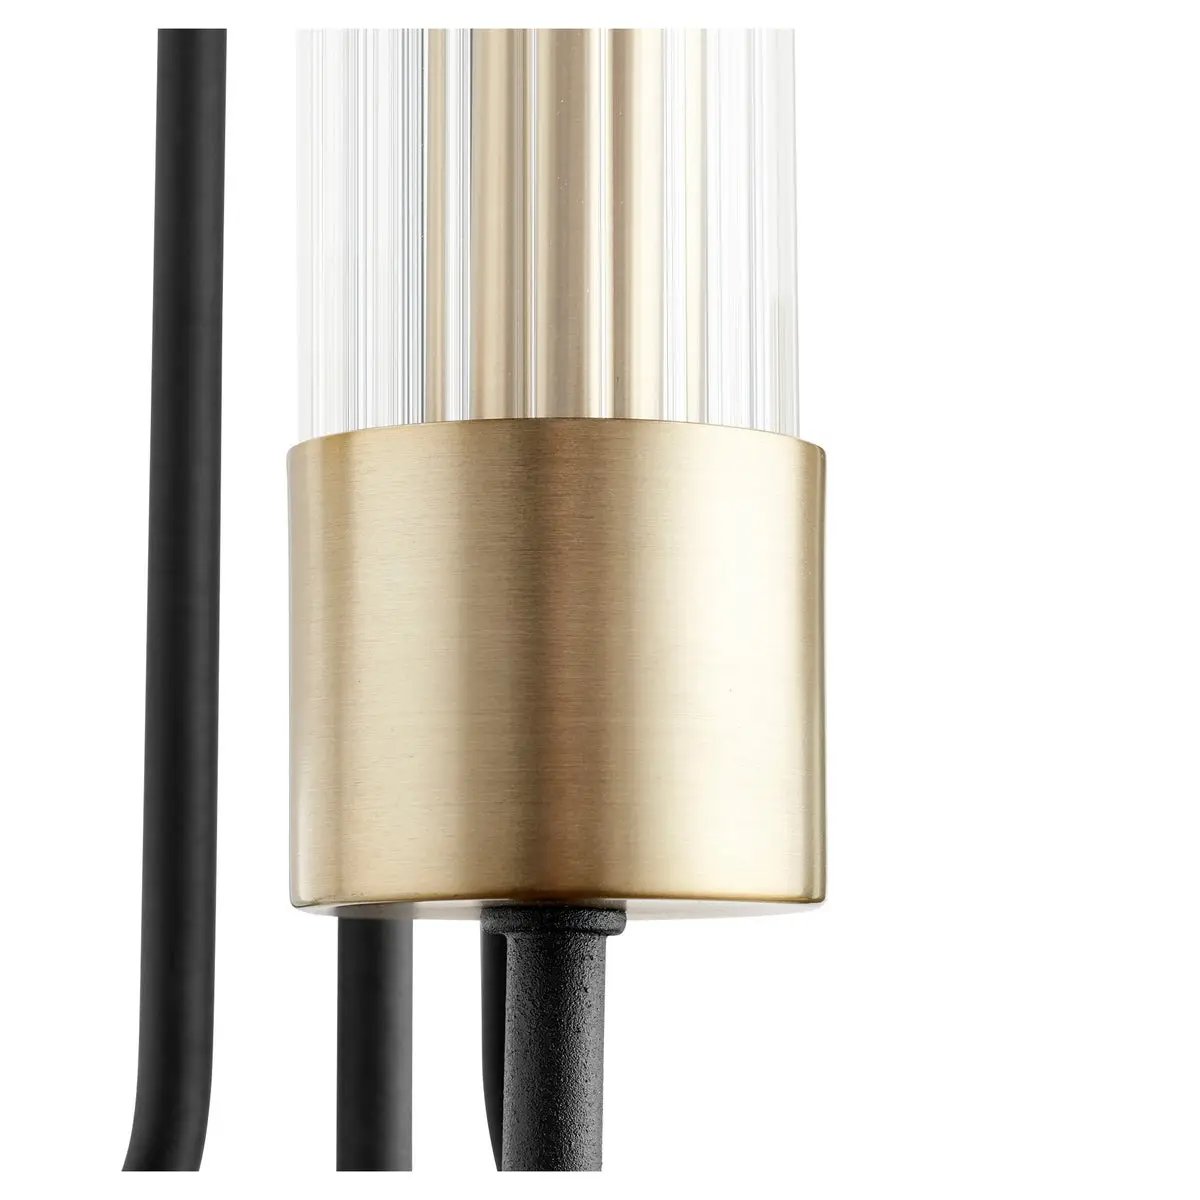 Transitional Wall Sconce with clear fluted glass shades and aged brass/noir finish. Minimalist-inspired design with soft-angular curves. Suitable for indoor and outdoor spaces. 12"W x 18"H x 7"E. 2-year warranty.